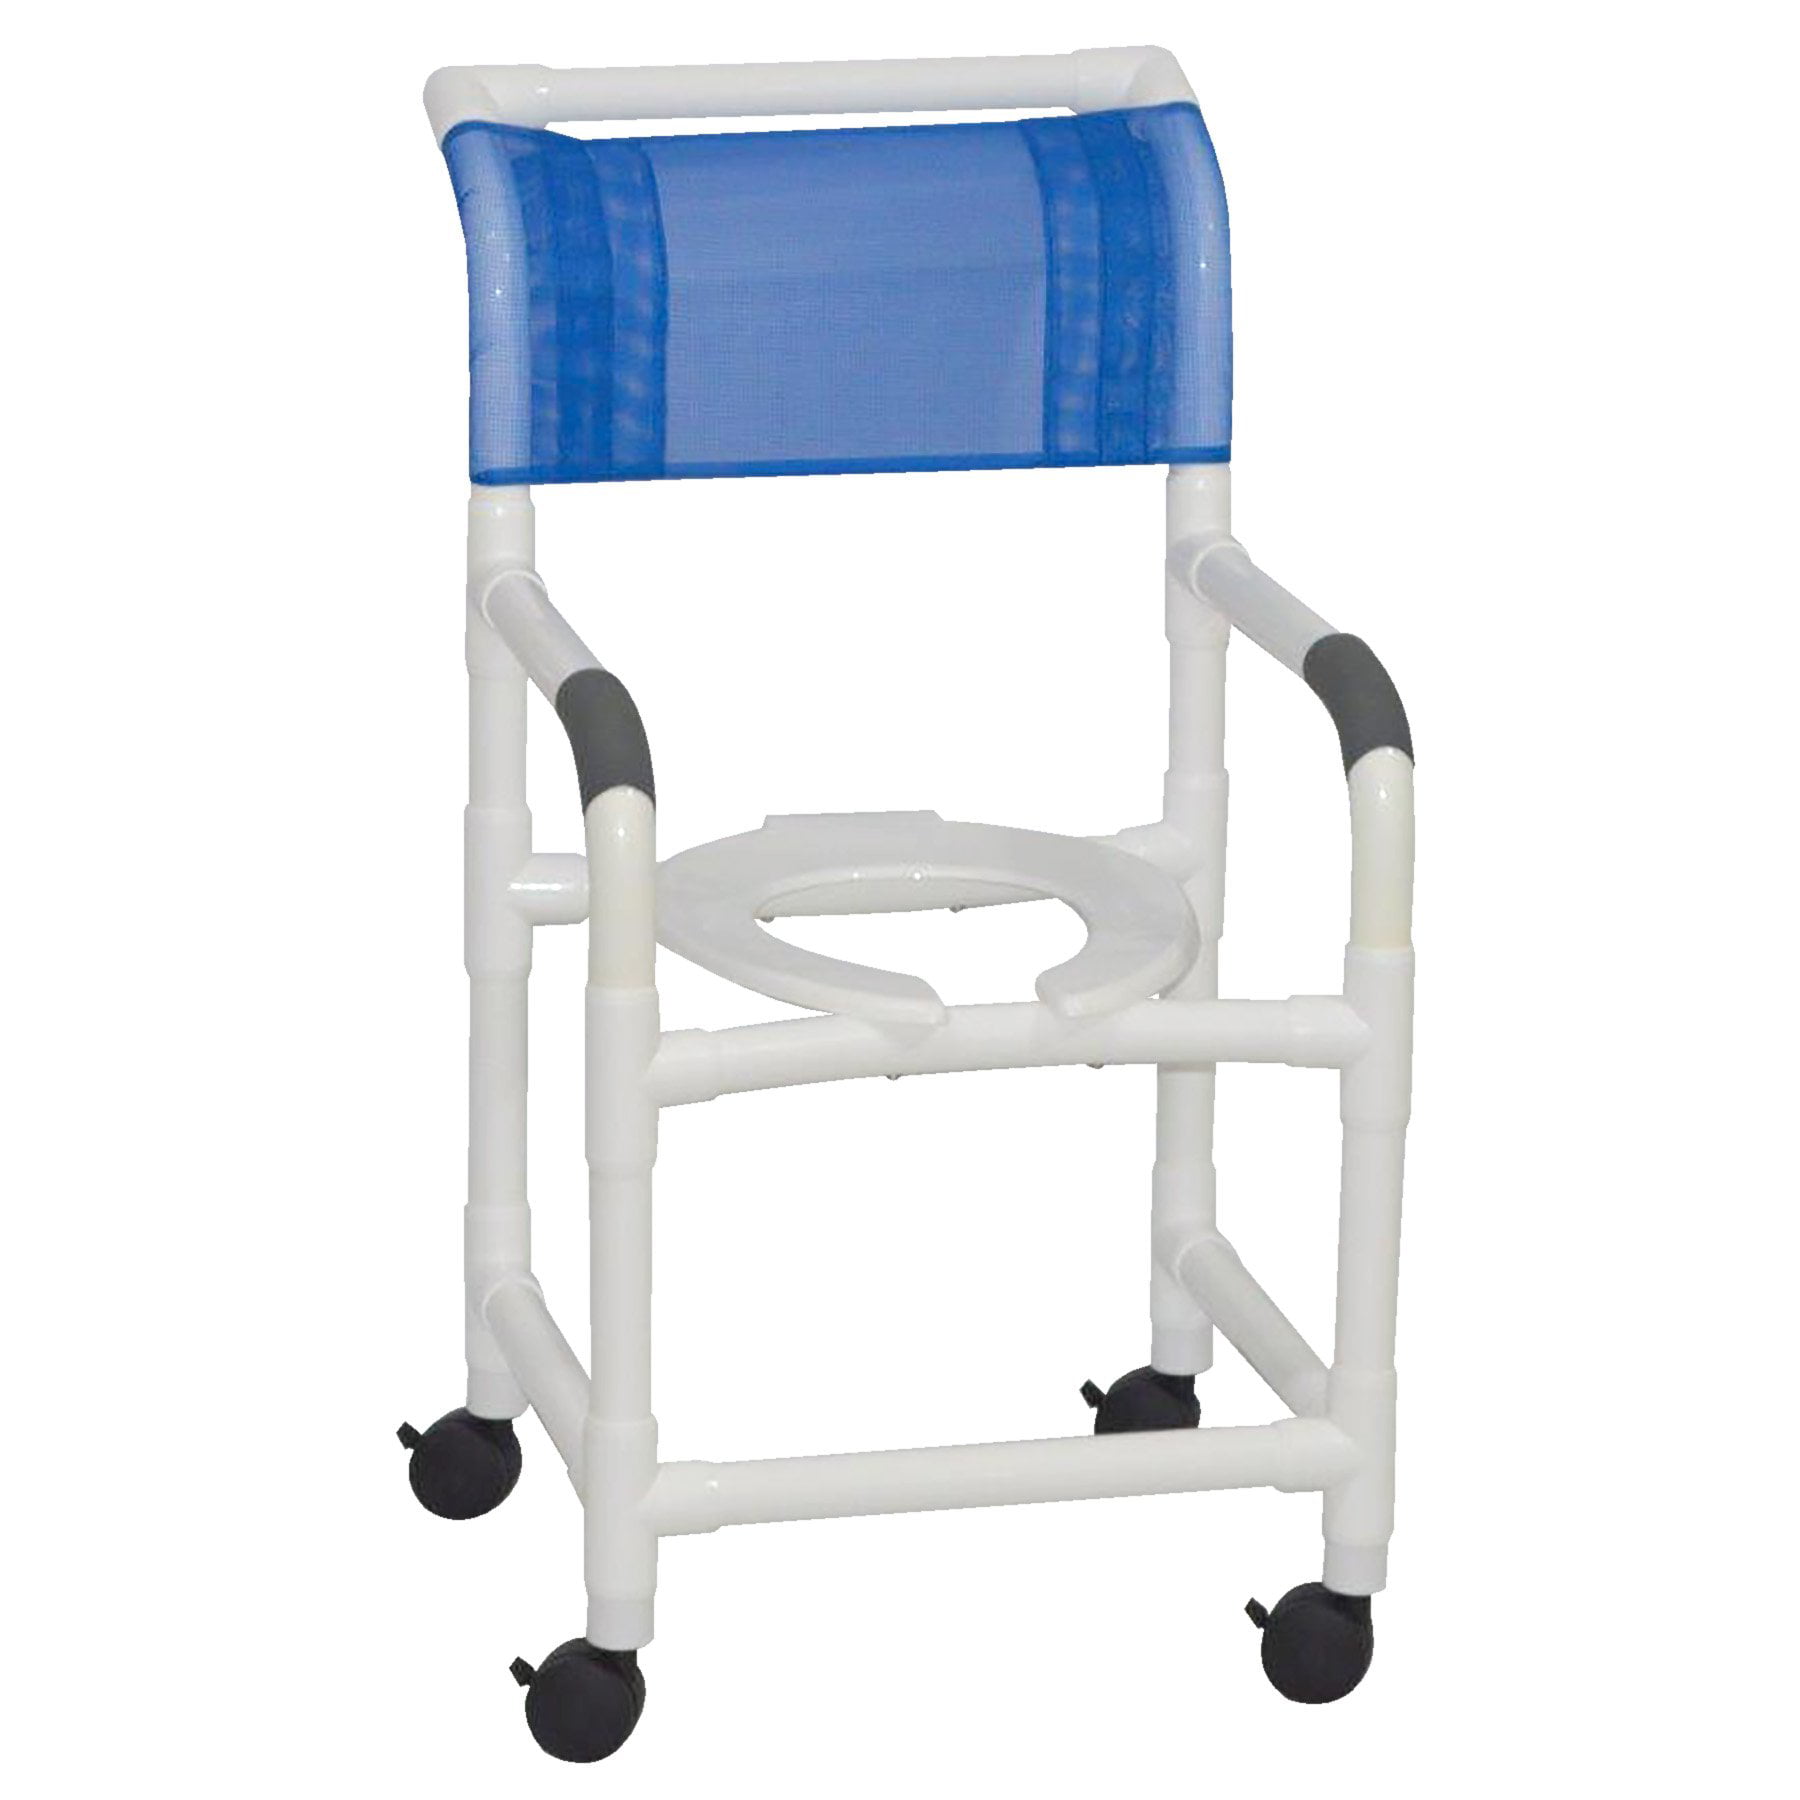 Mjm International Shower Chair With Arms Pvc Frame Mesh Back 21 Inch